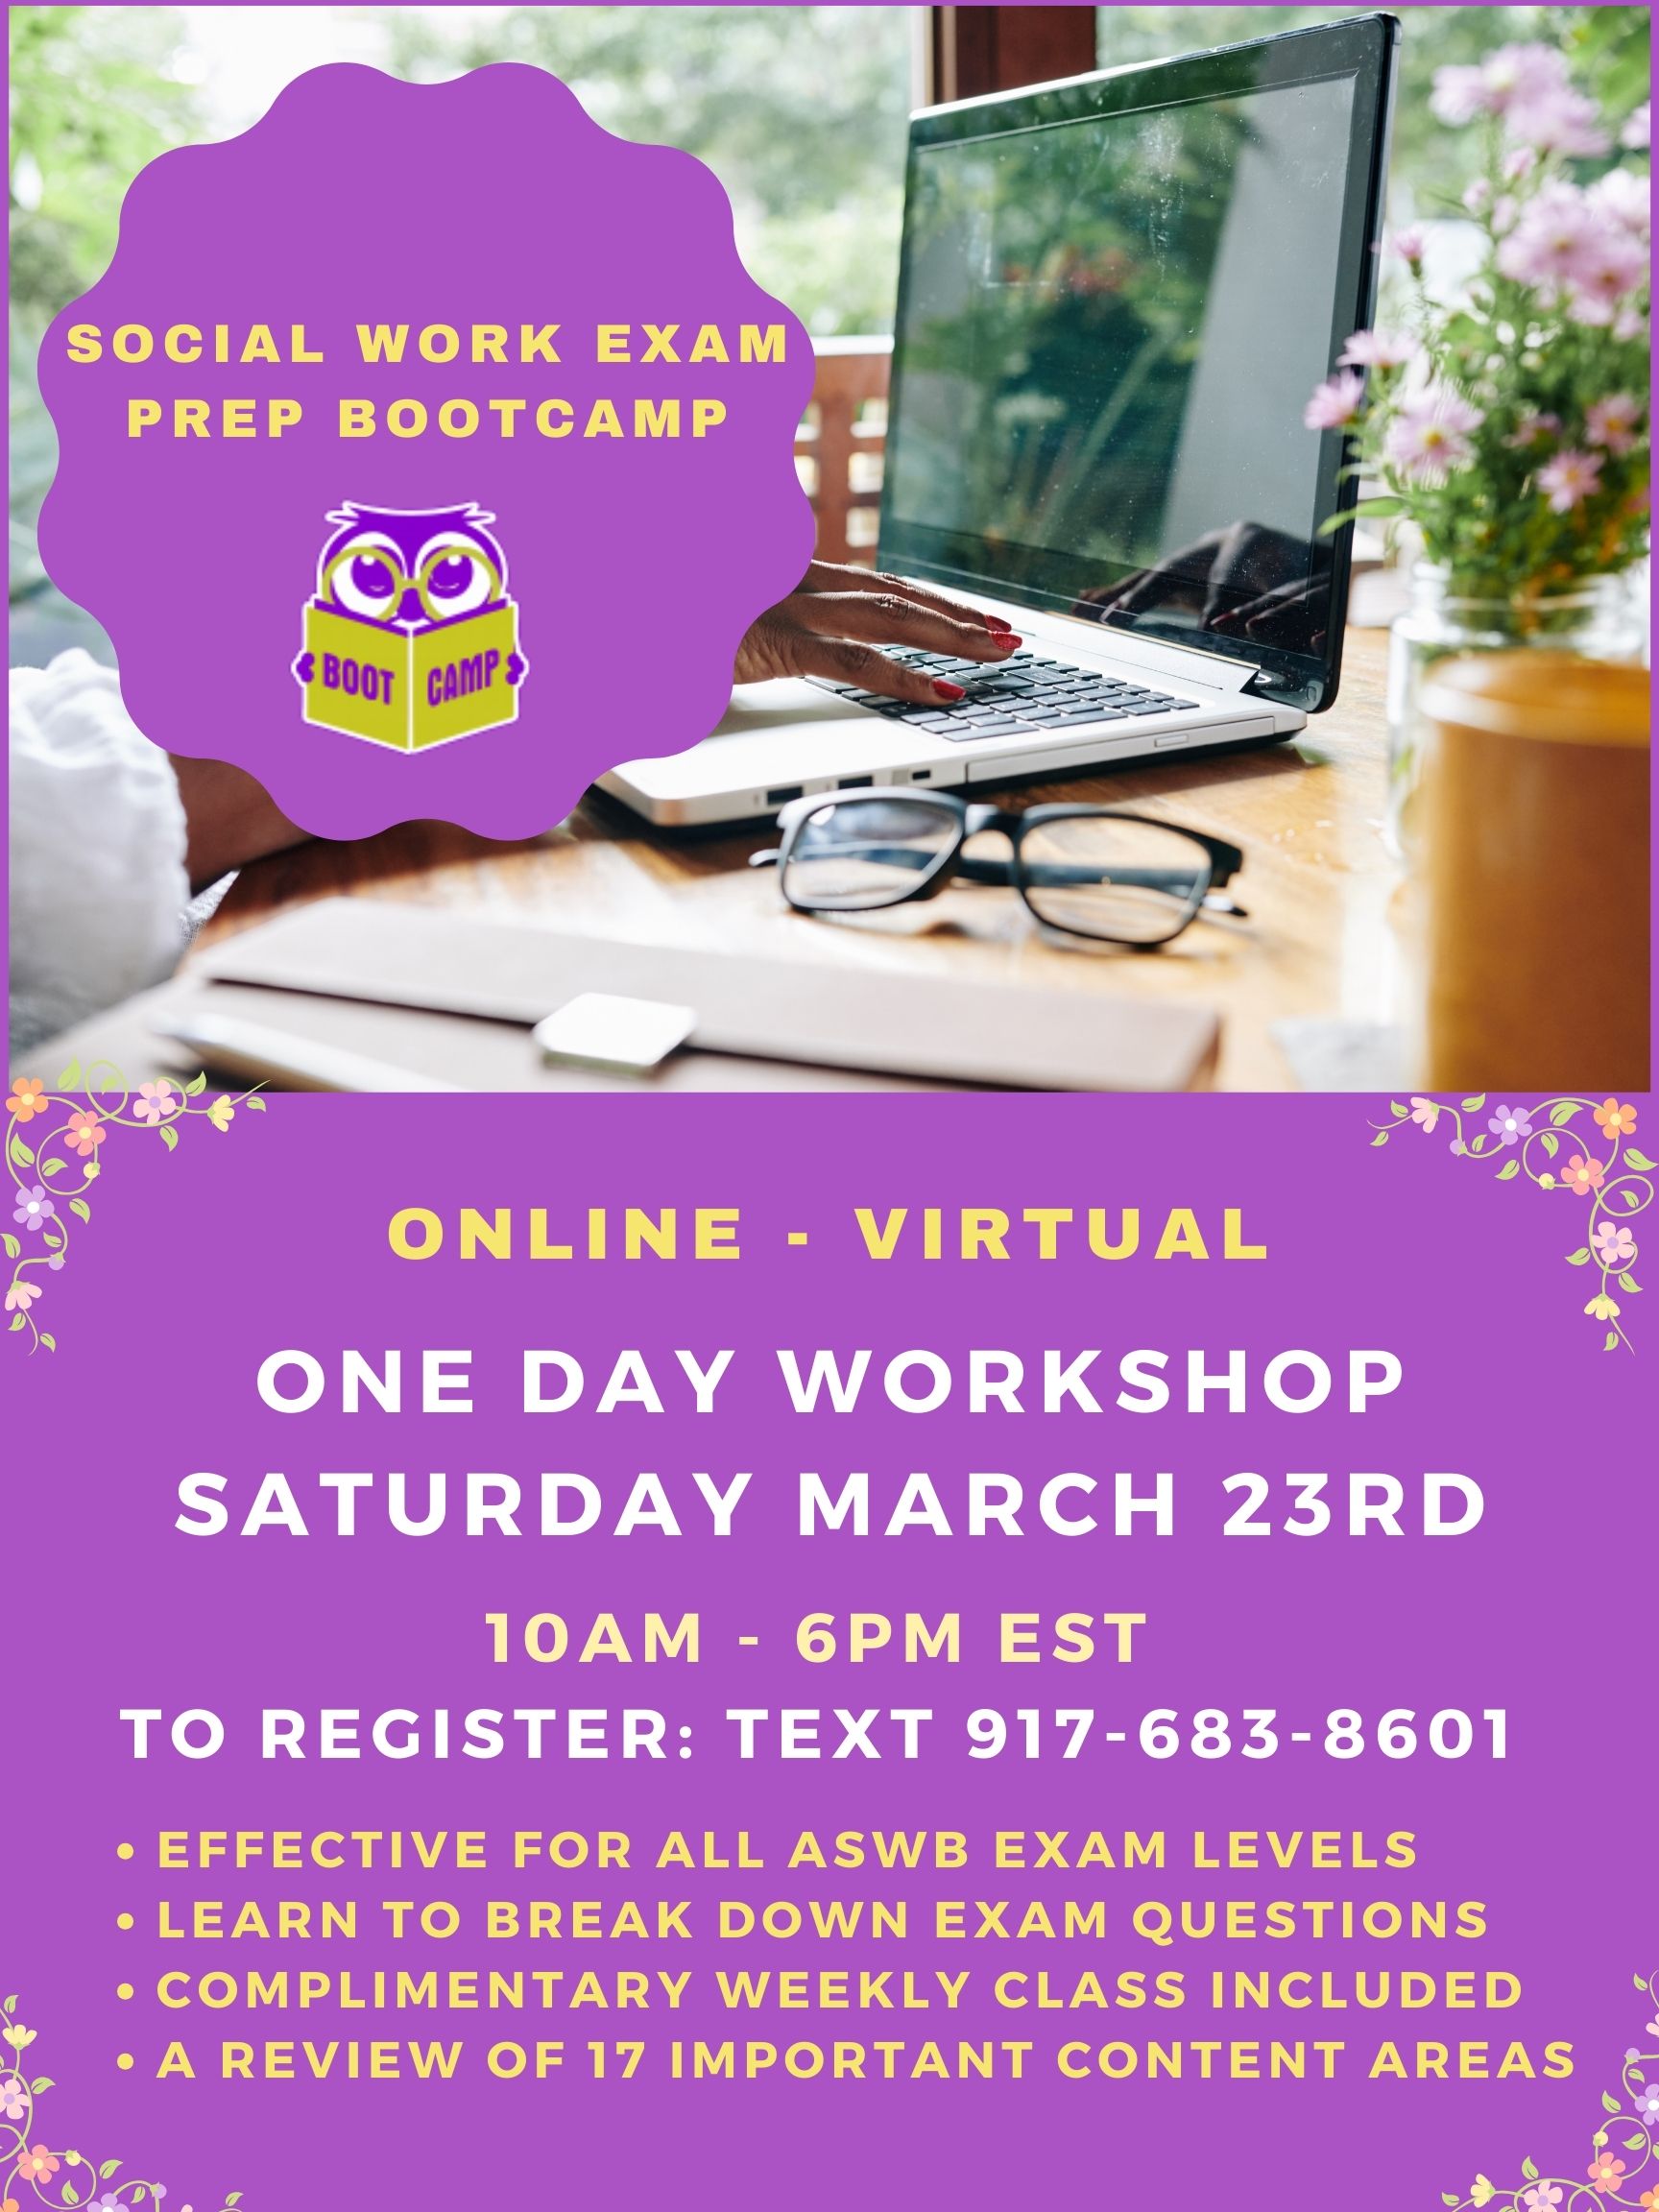 social-work-exam-bootcamp-one-day-AUG-workshop